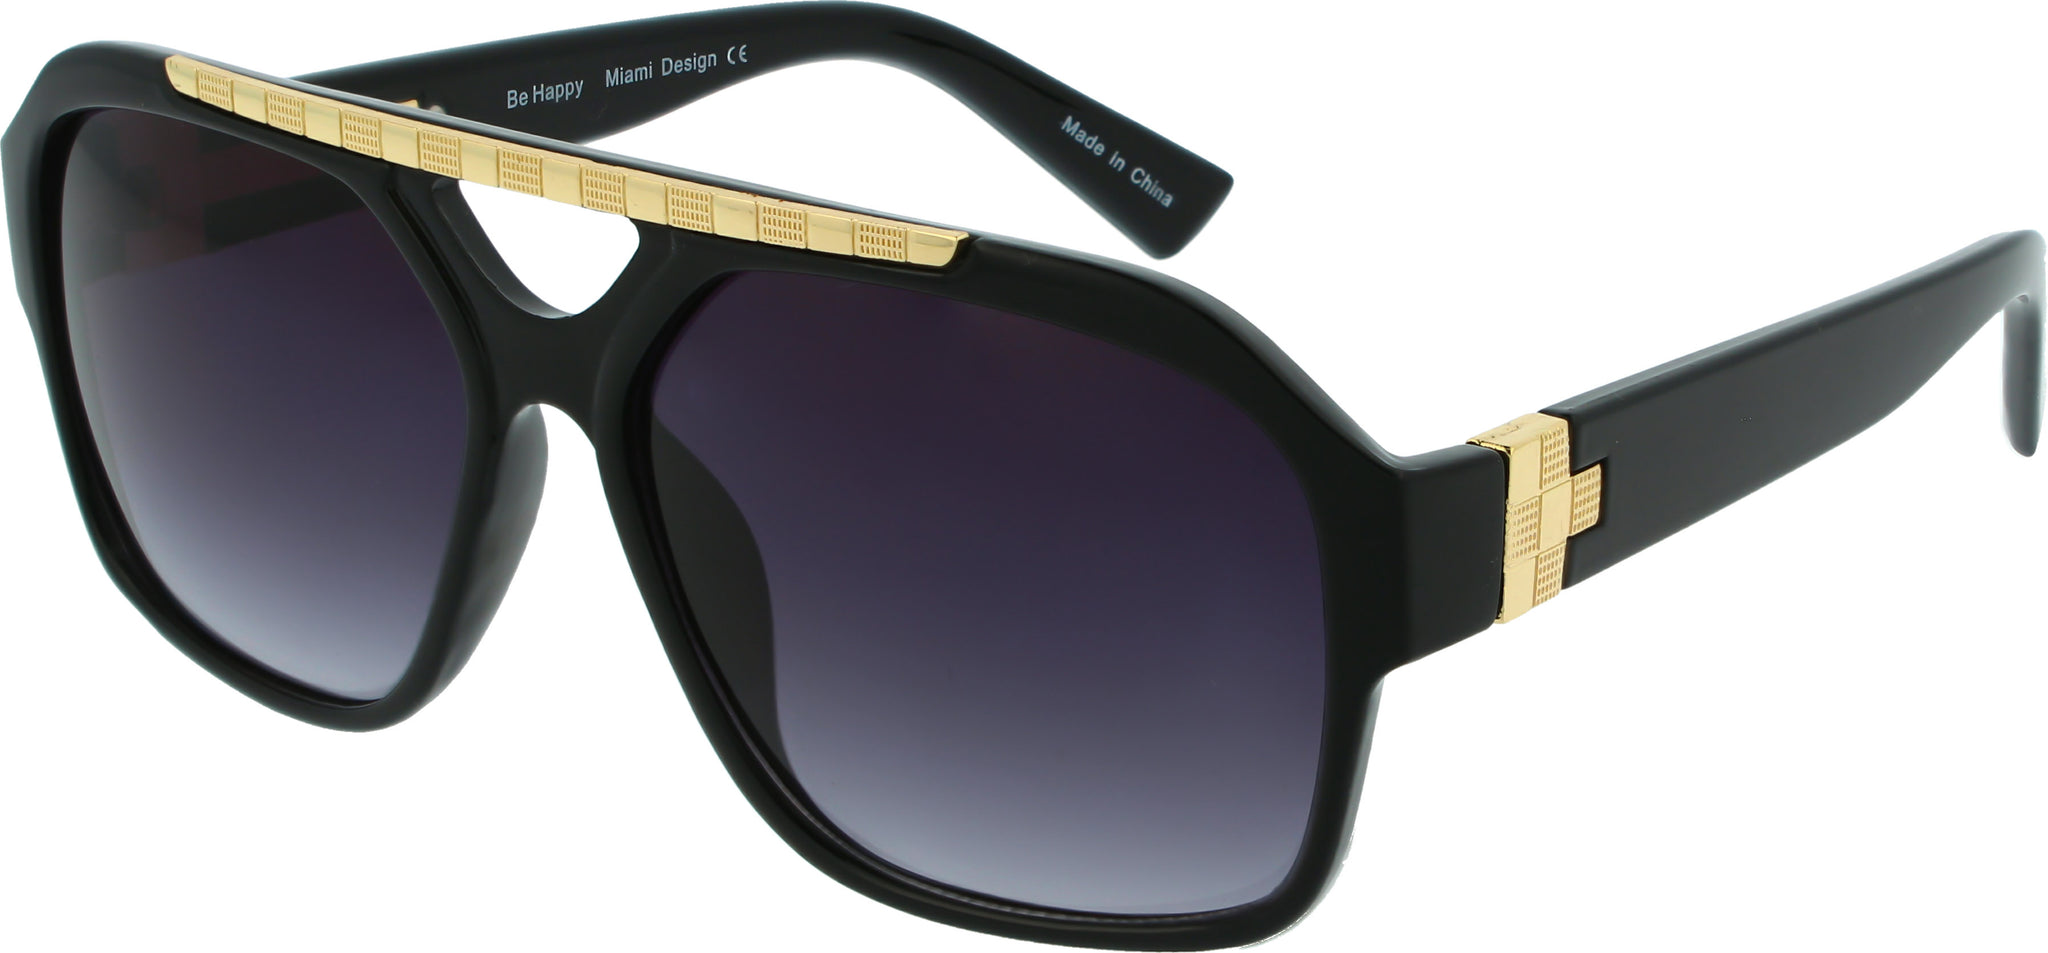 Top Louis Vuitton Sunglasses You NEED To Have!